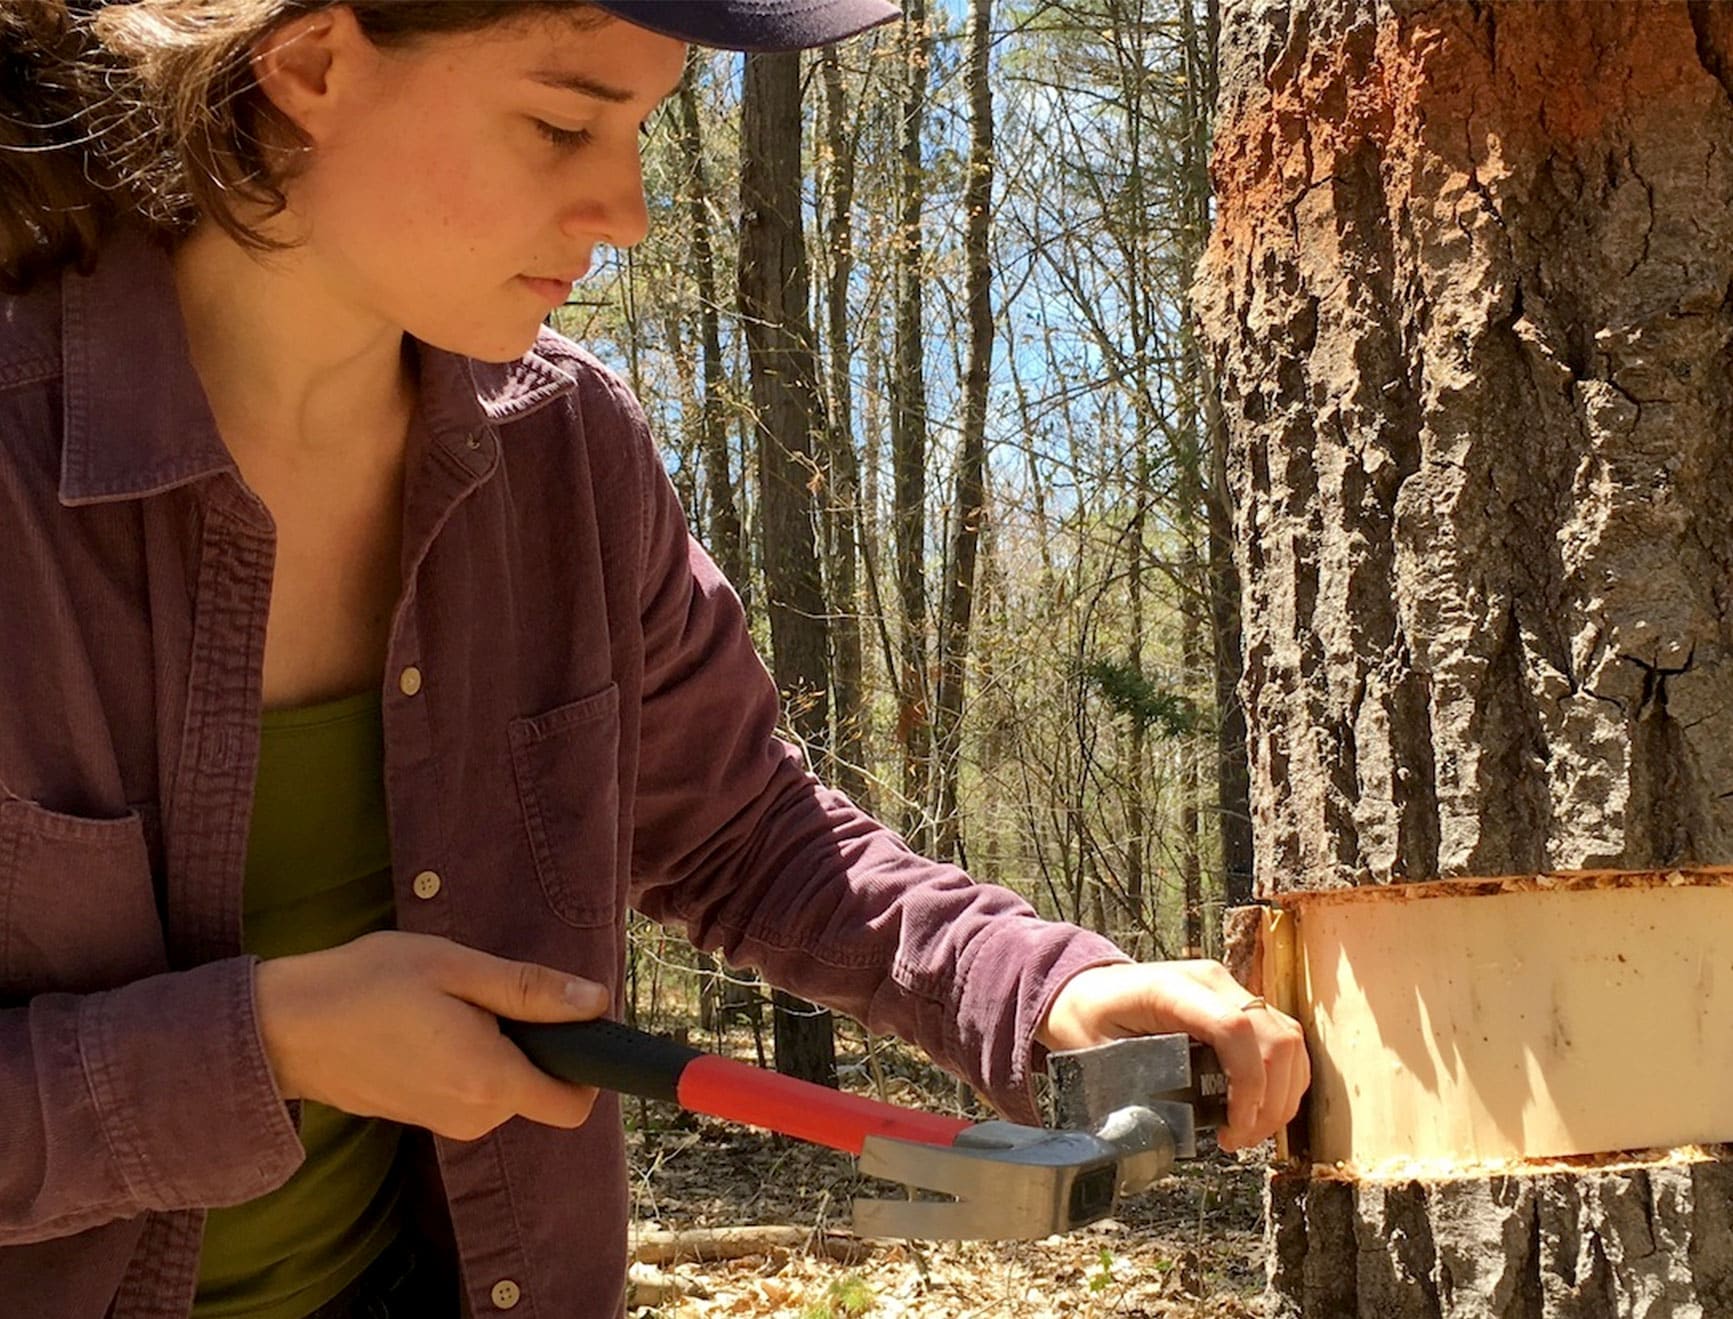 Kayla Mathes, a doctoral candidate in the integrative life sciences program of VCU Life Sciences, removes tree bark and sugar-transporting tissues immediately under it, as part of field work for a class.